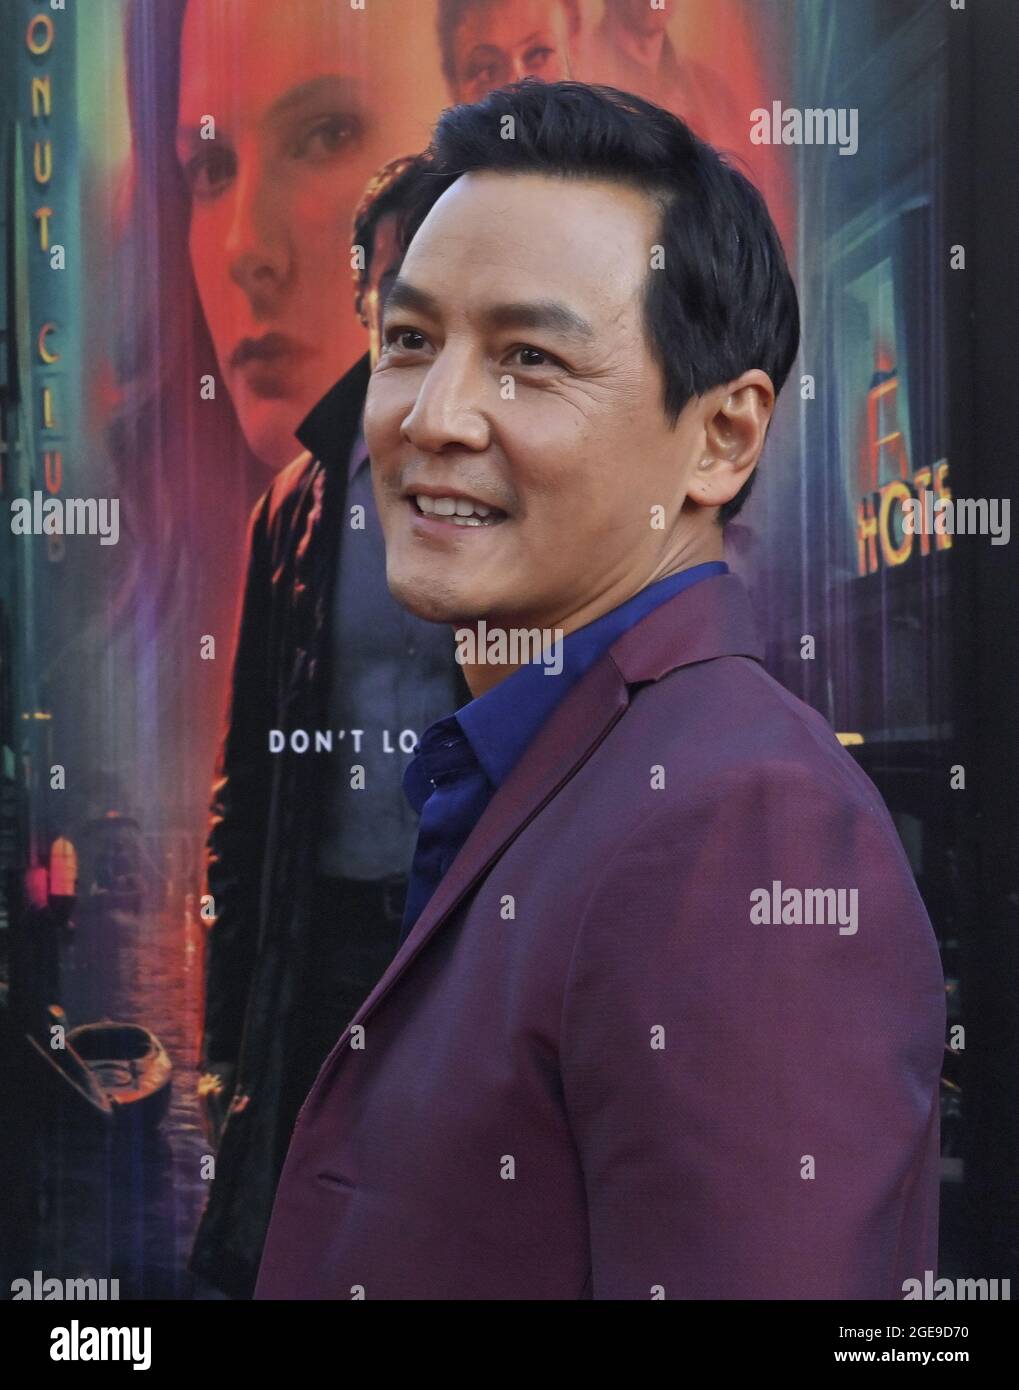 Los Angeles, United States. 18th Aug, 2021. Daniel Wu, a cast member in the sci-fi motion picture thriller 'Reminiscence' attends the premiere of the film at the TCL Chinese Theatre in the Hollywood section of Los Angeles on Tuesday, August 17, 2021. Storyline: Nick Bannister, a private investigator of the mind, navigates the alluring world of the past when his life is changed by new client Mae. A simple case becomes an obsession after she disappears and he fights to learn the truth about her. Photo by Jim Ruymen/UPI Credit: UPI/Alamy Live News Stock Photo